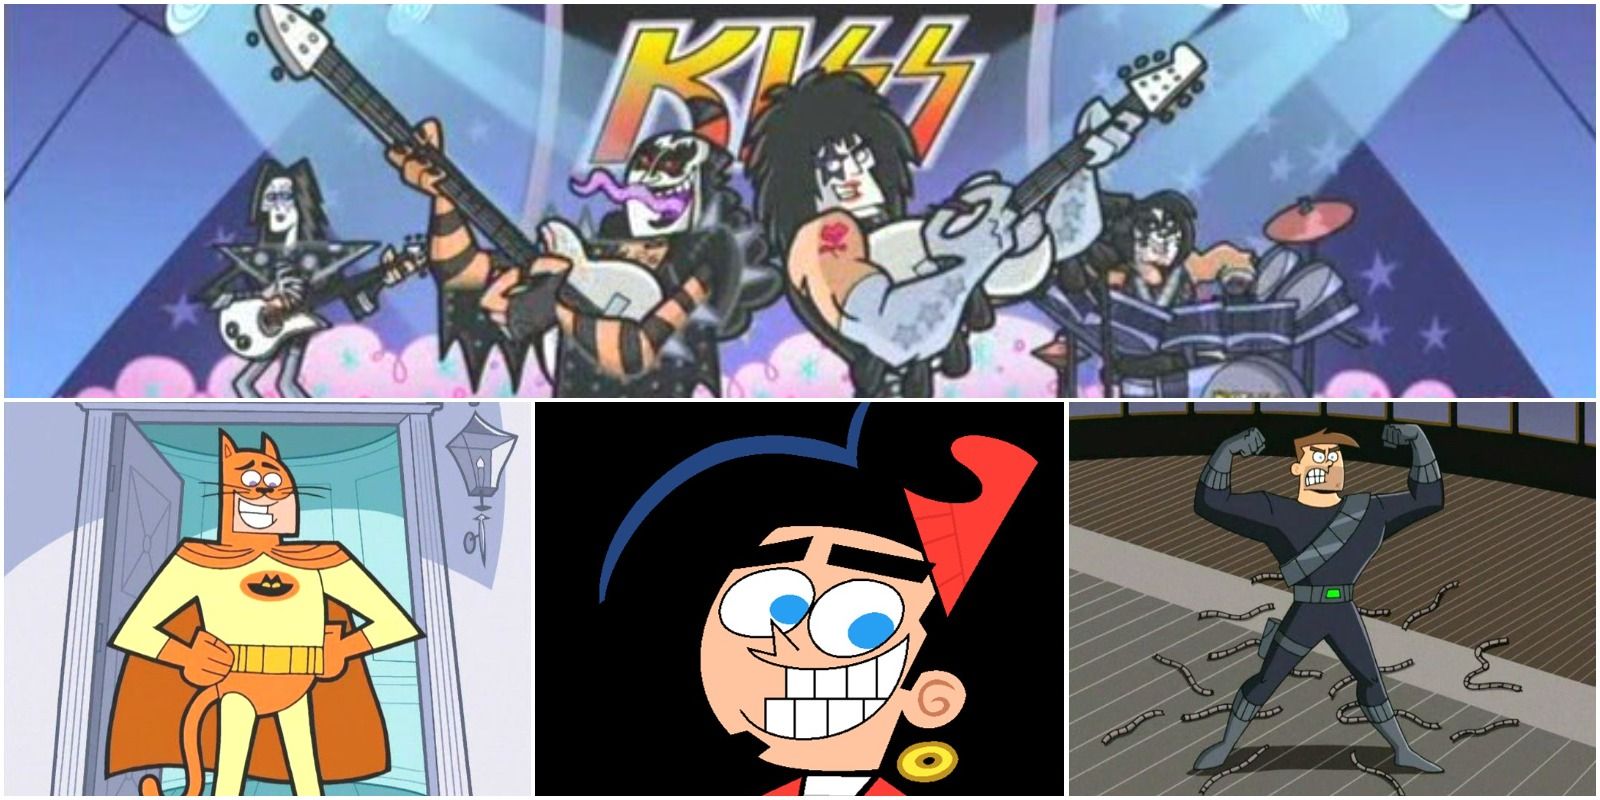 KISS, Adam West, Chris Kirkpatrick, and Alec Baldwin Guest Starring on the Fairly OddParents